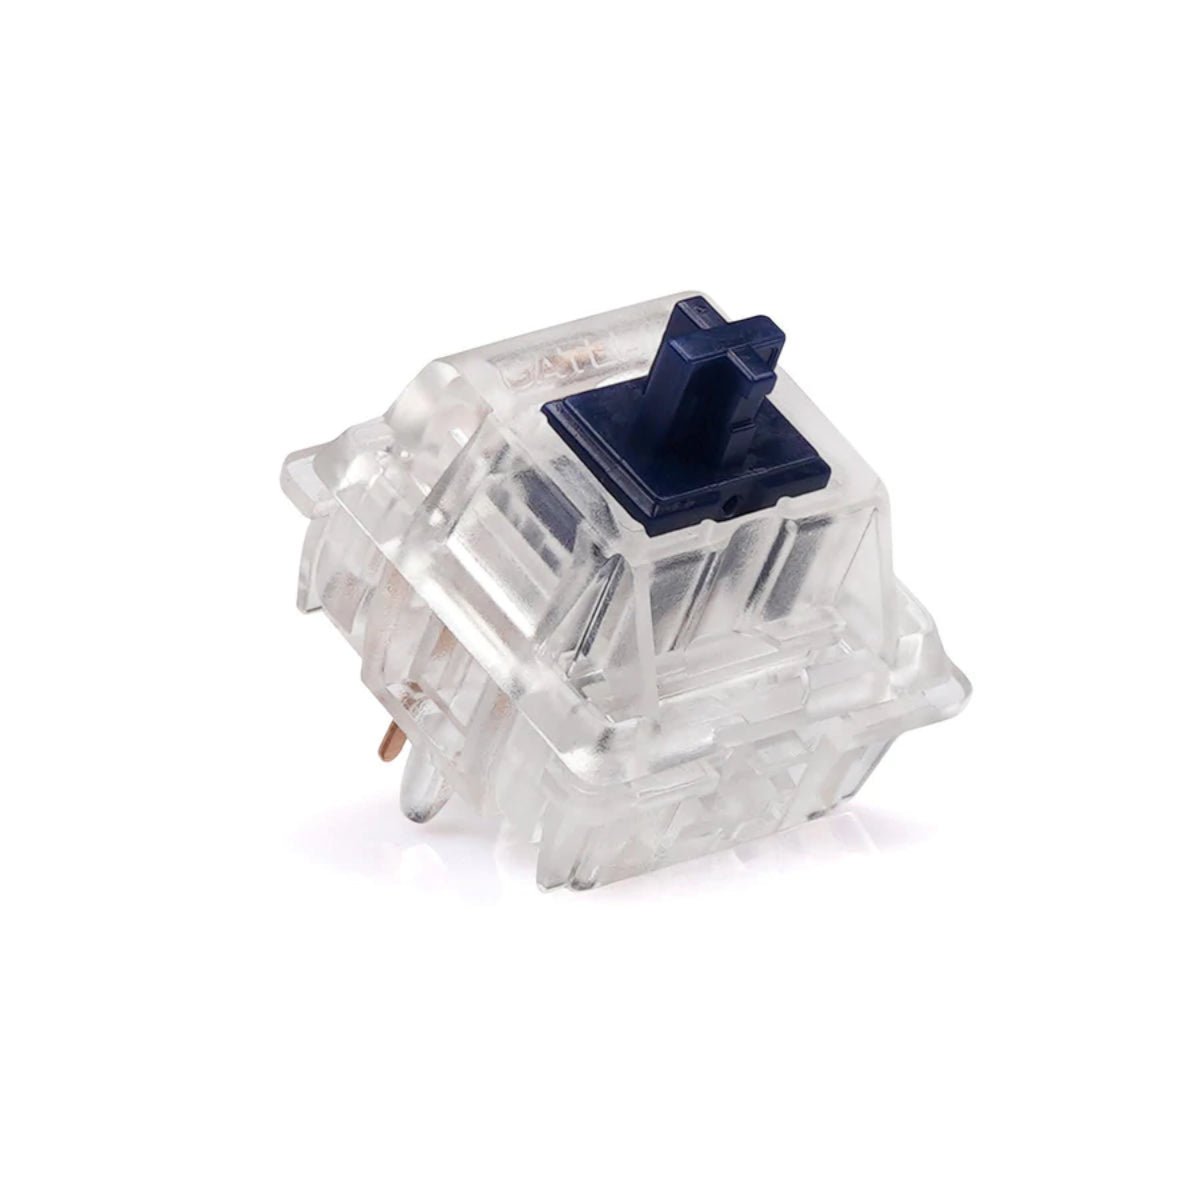 KBD Fans Zeal V2 Tactile Switches 78g - Zilents - Store 974 | ستور ٩٧٤